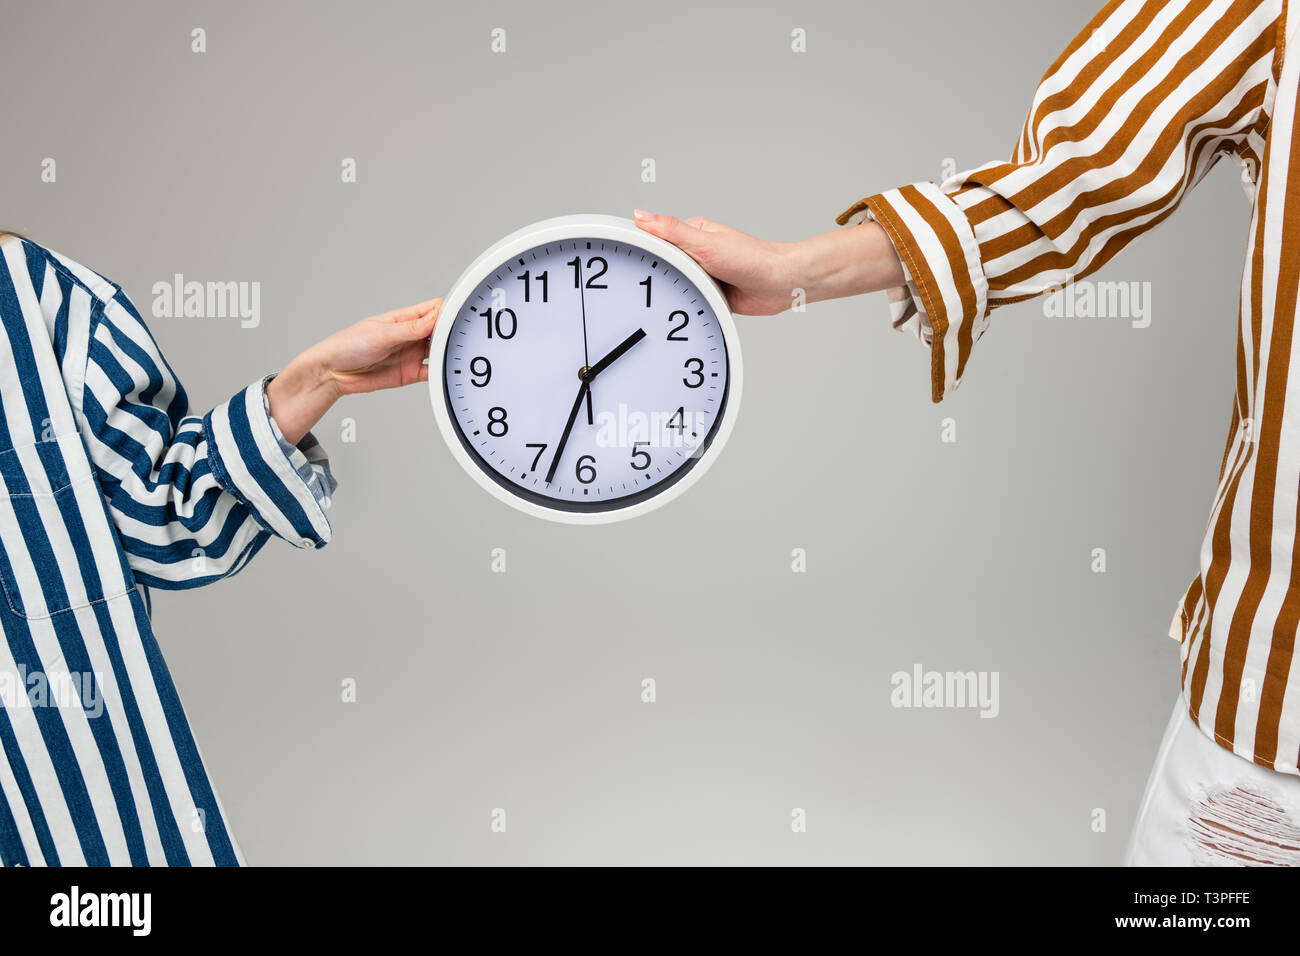 Women in oversize striped outfits carrying plain wall clock Stock Photo